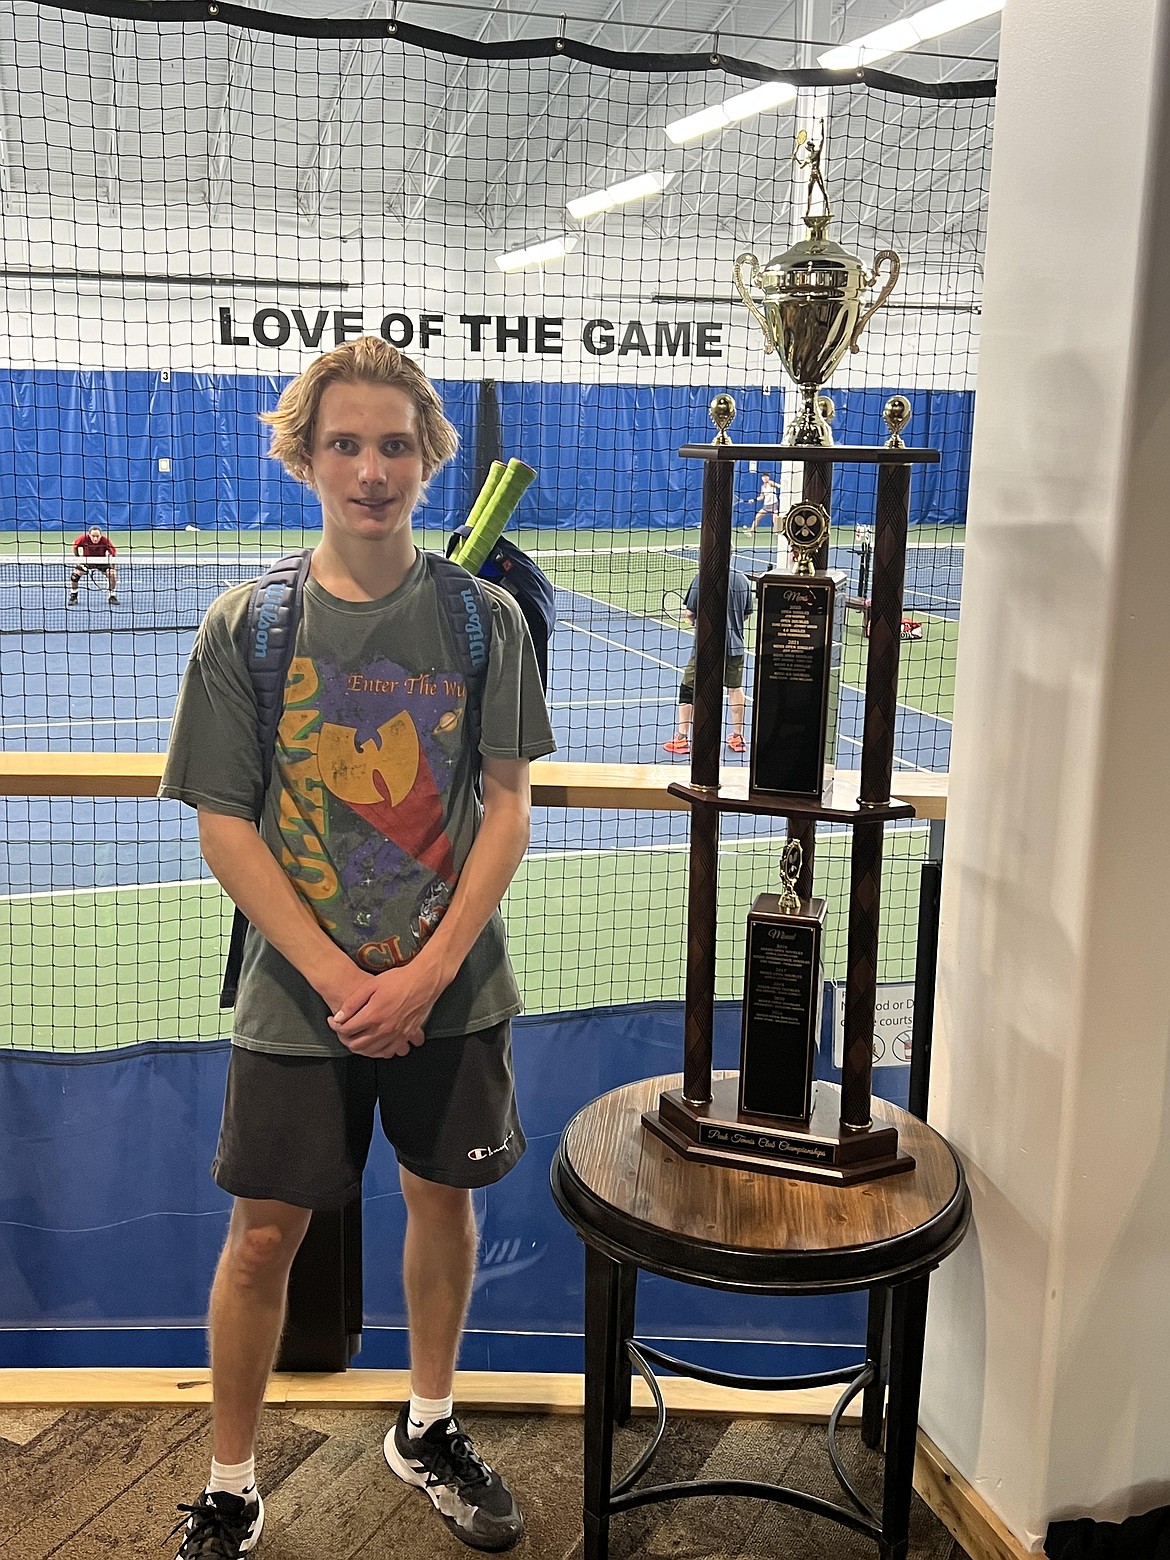 Courtesy photo
The men's open singles champion at the recent Peak Hayden member tennis tournament was Turner Cox, who defeated Connor Judson 6-4, 3-6, 10-6.